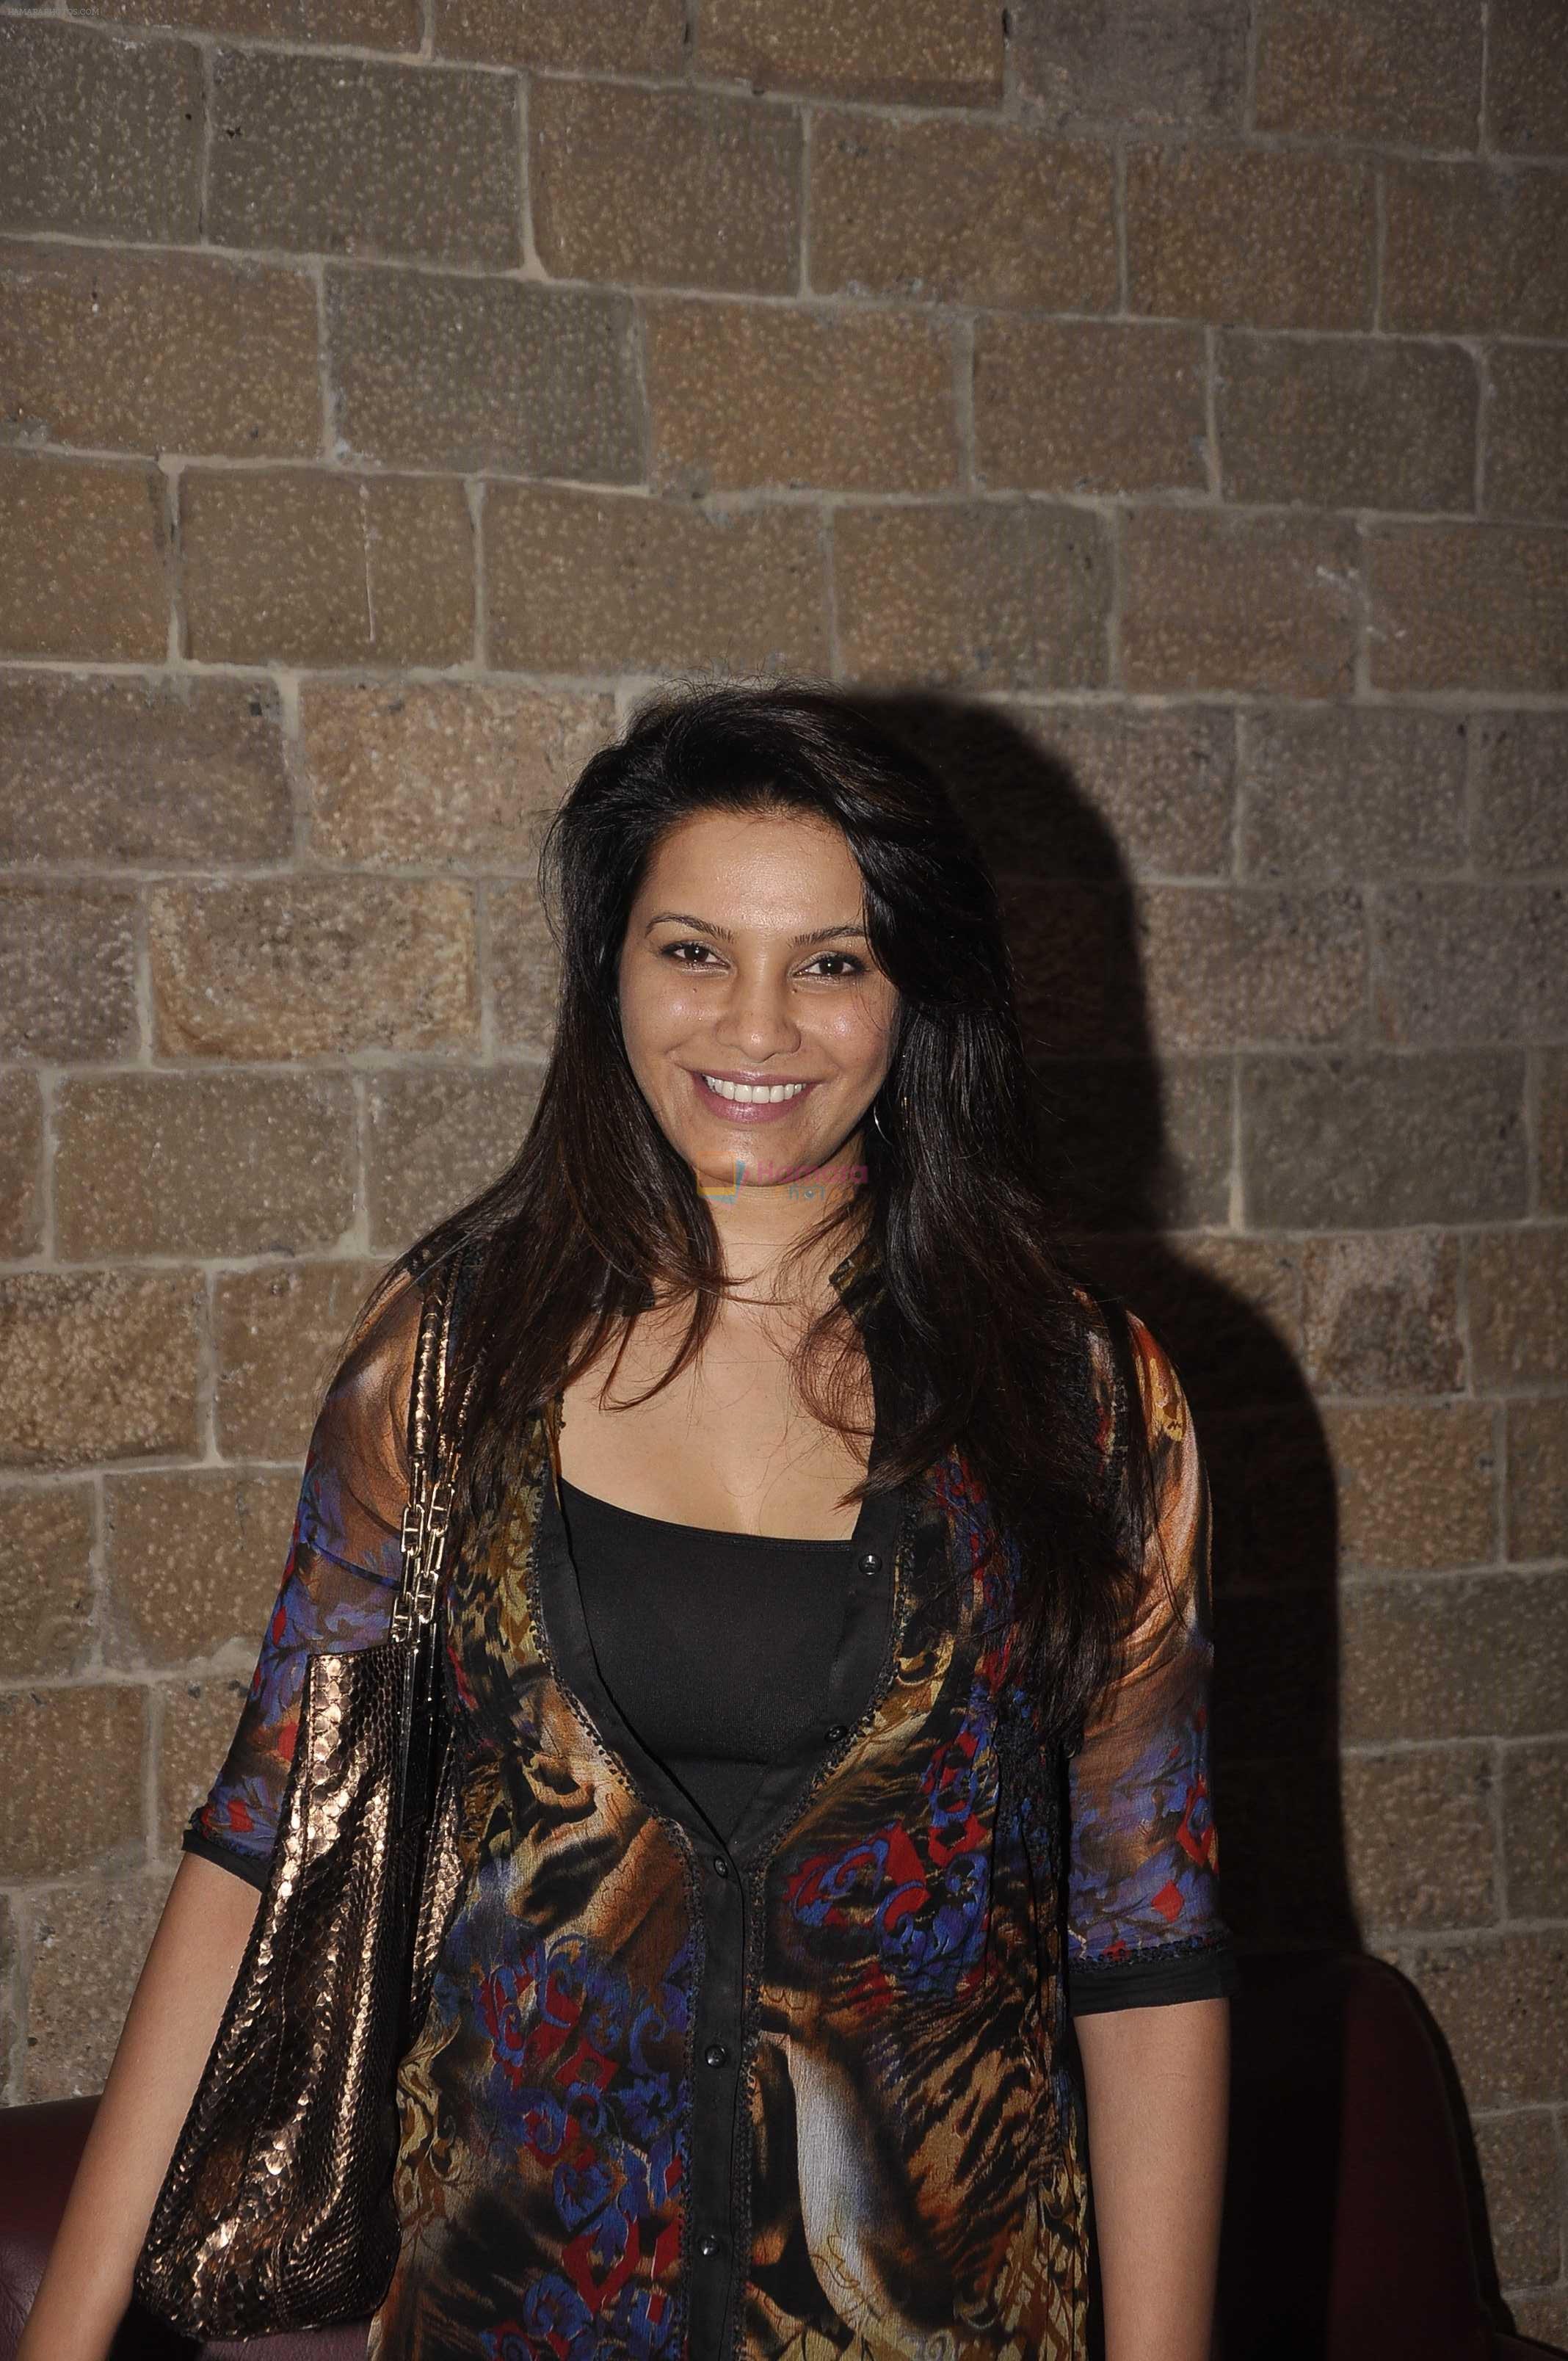 Diana Hayden at Jesus super christ play in NCPA on 29th March 2015